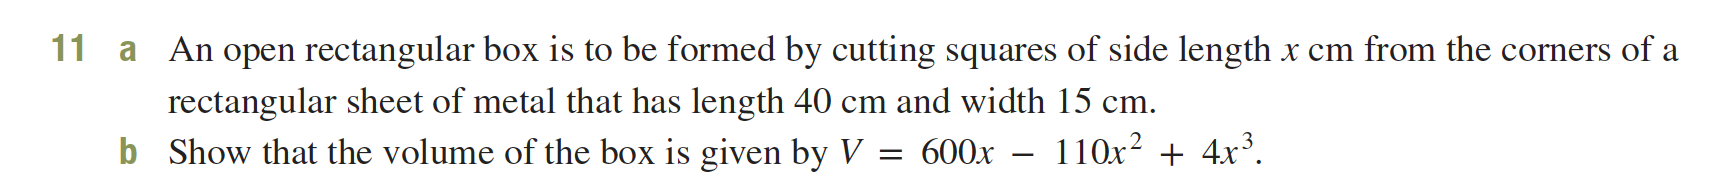 11
An open rectangular box is to be formed by cutting squares of side length x cm from the corners of a
a
rectangular sheet of metal that has length 40 cm and width 15 cm.
Show that the volume of the box is given by V
- 110x² + 4x³.
b
600x
